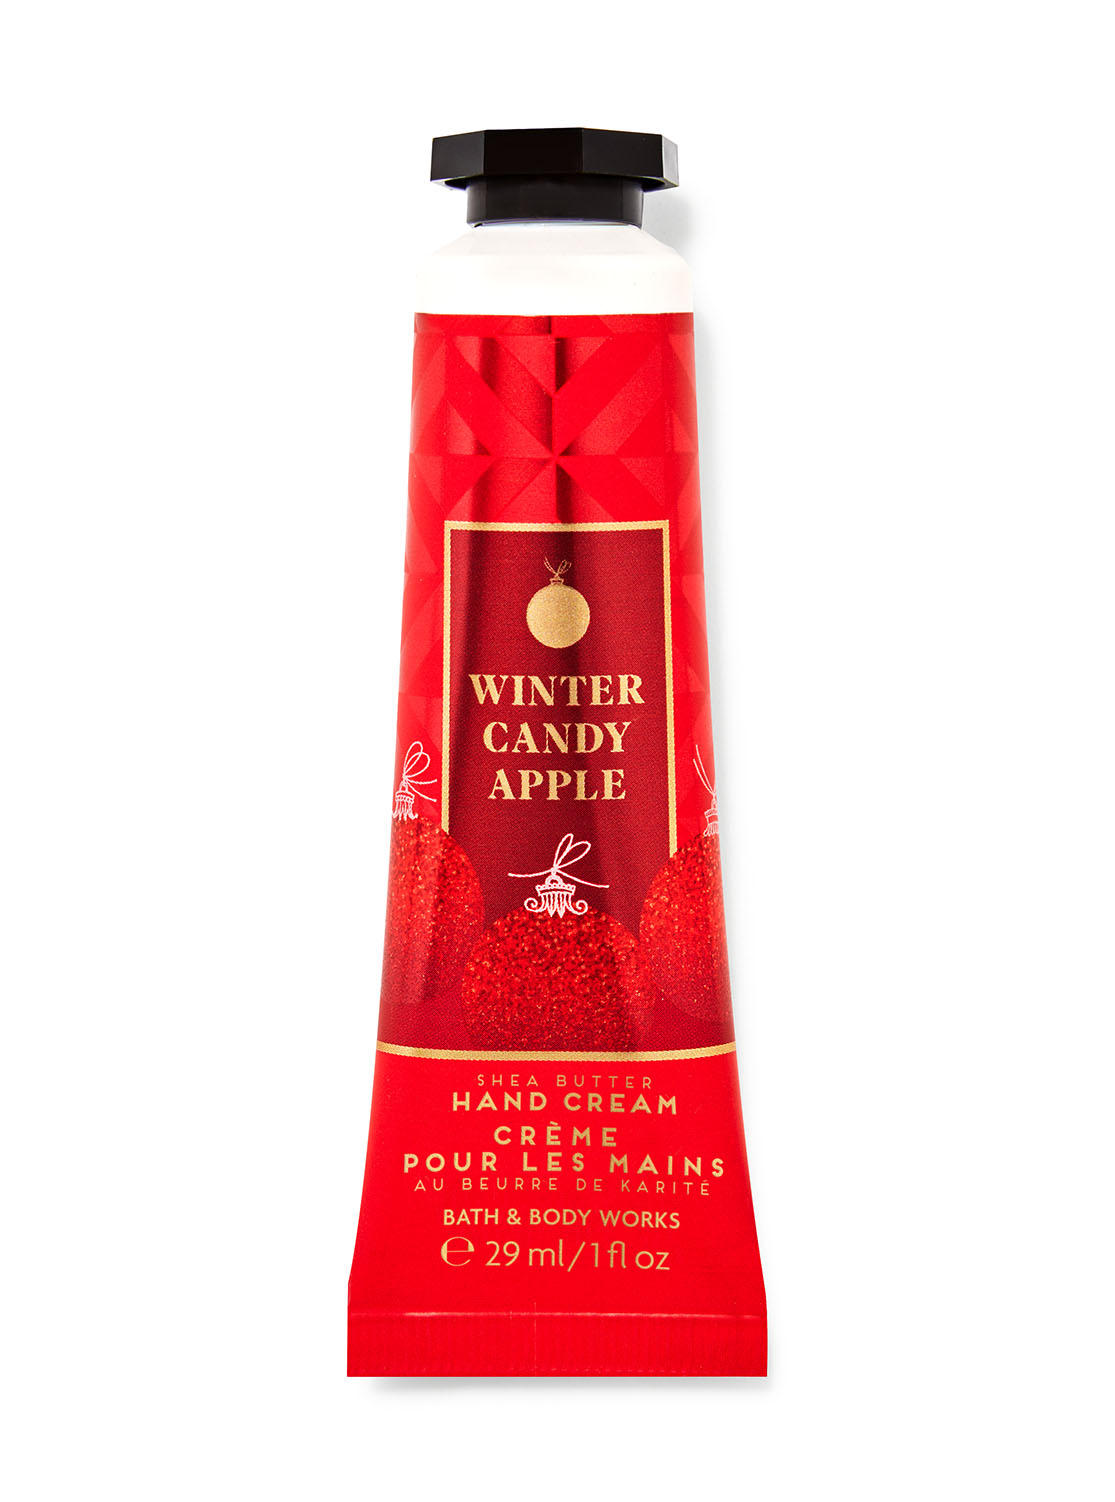 Winter Candy Apple Hand Cream | Bath and Body Works